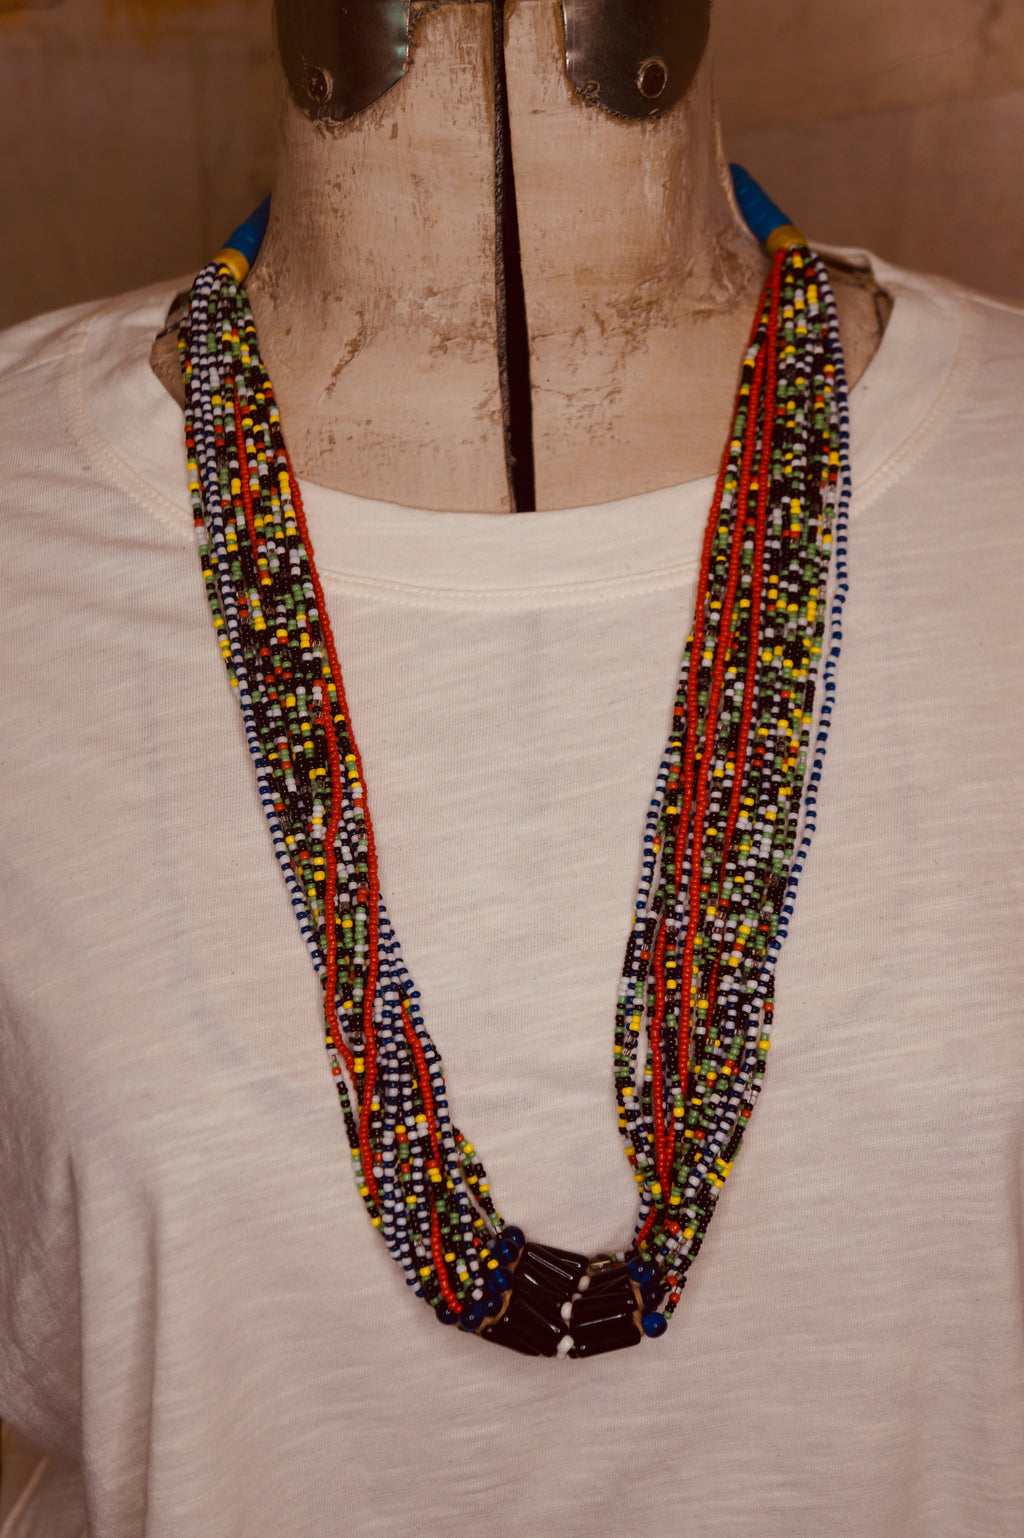 African Bead Multi-strand Necklace